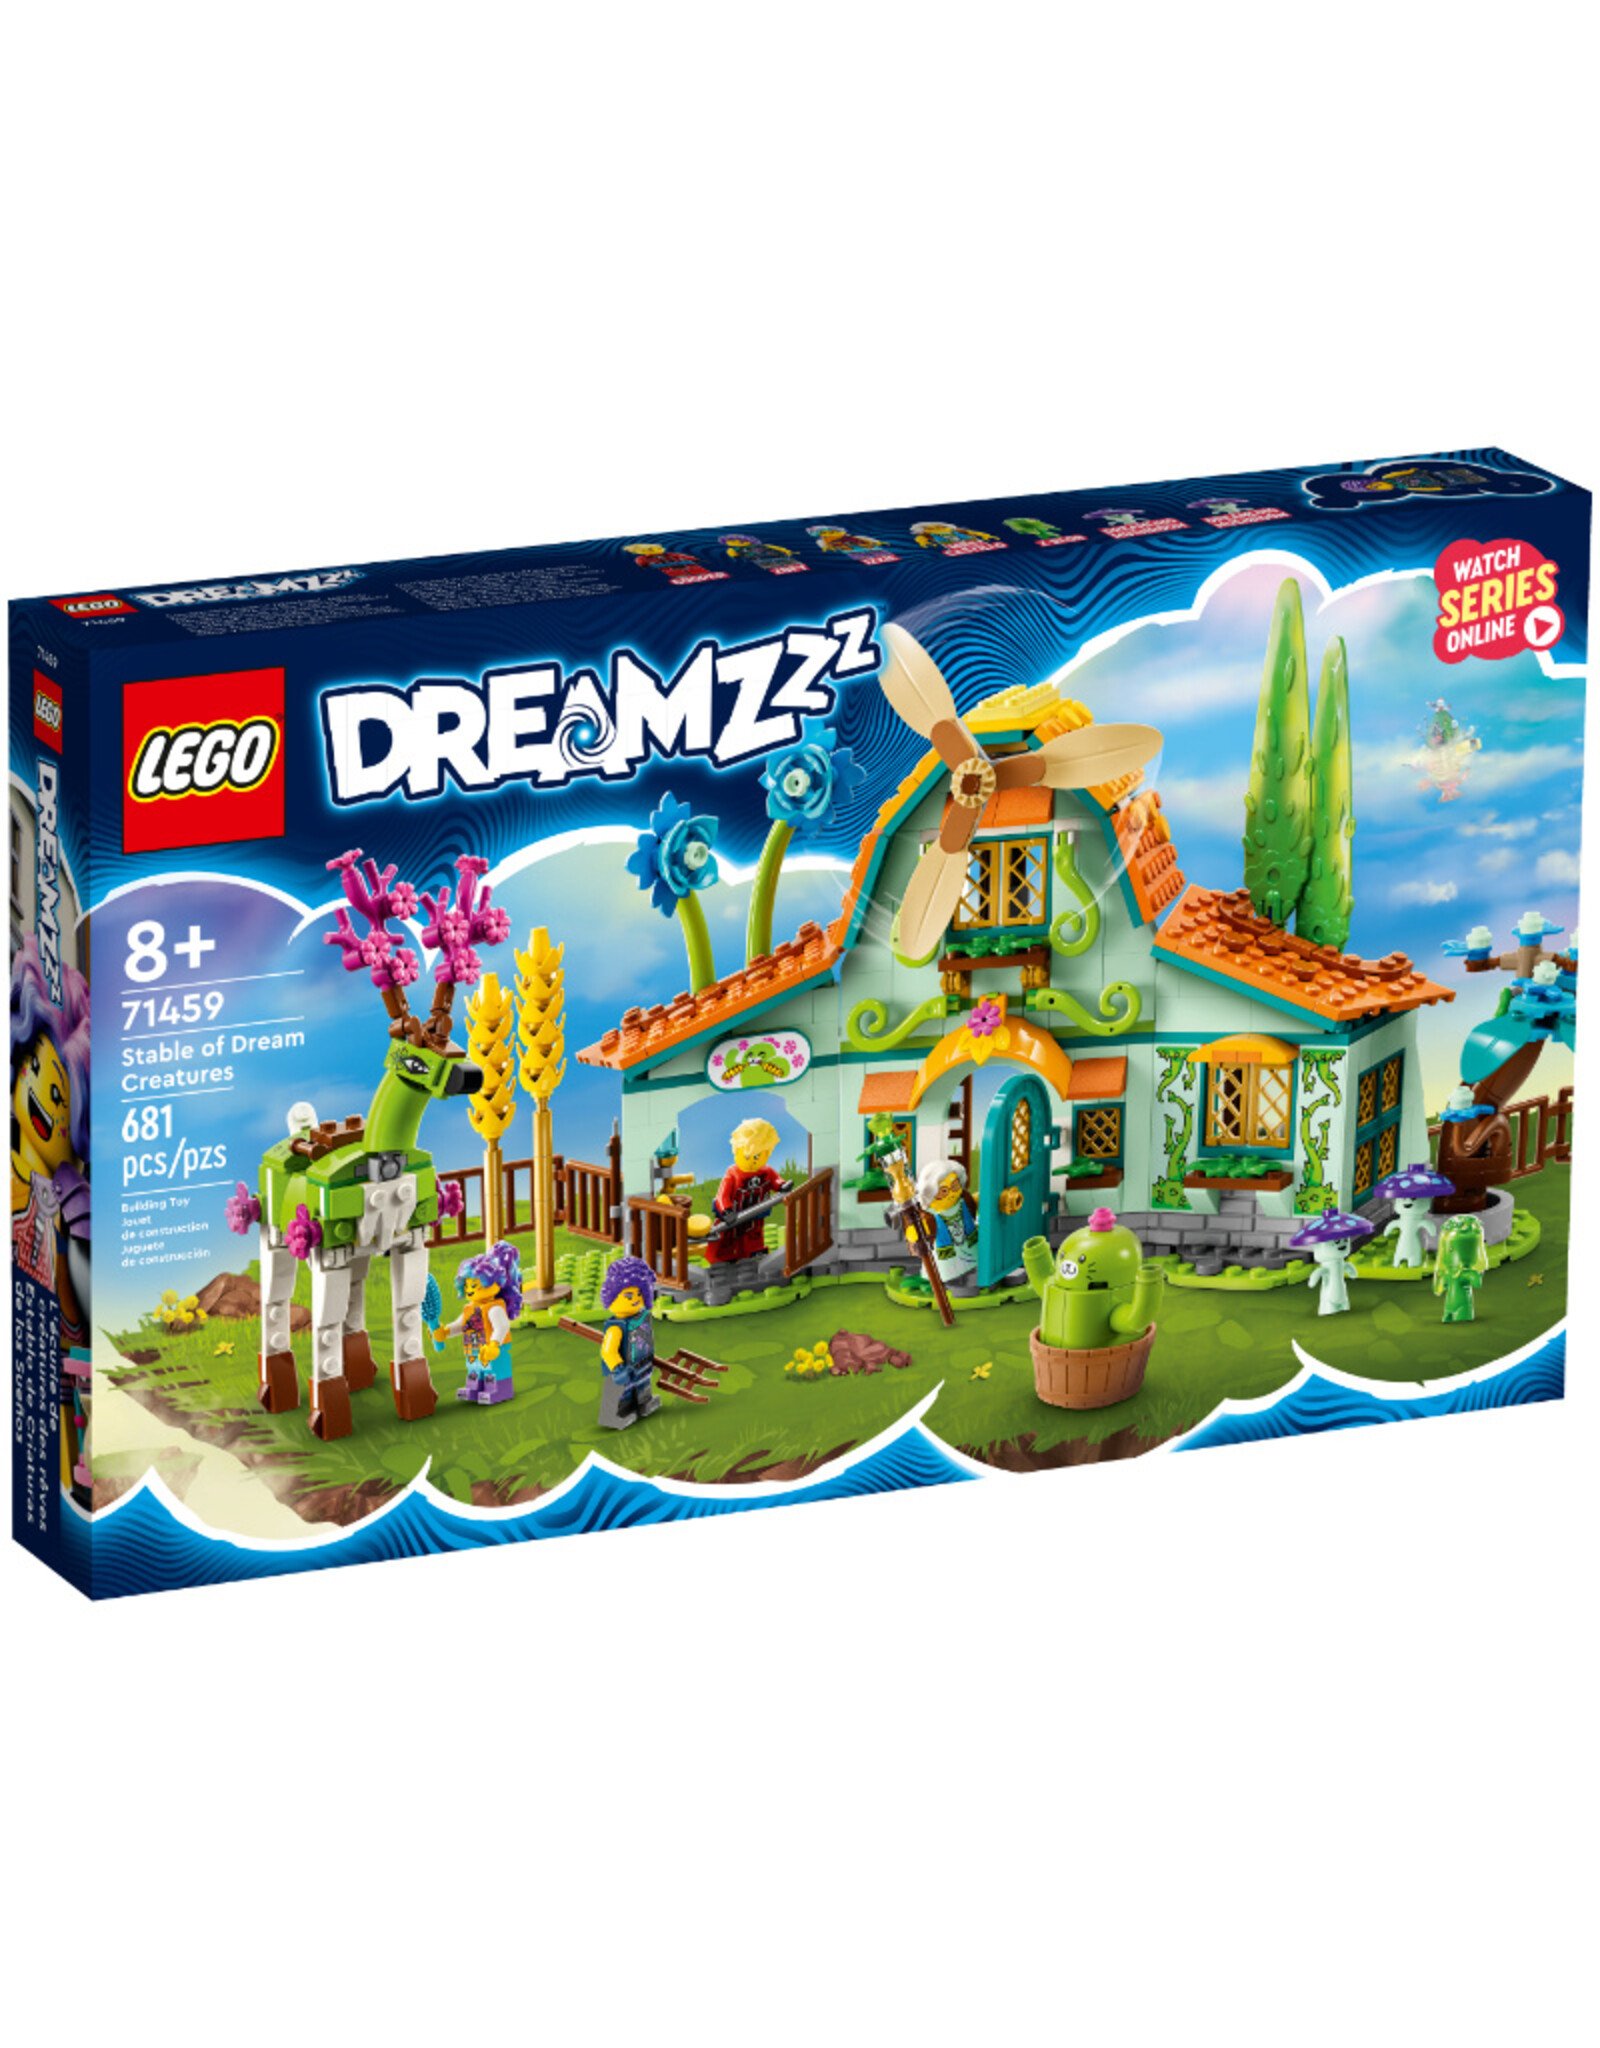 LEGO Dreamzzz 71459 Stable of Dream Creatures